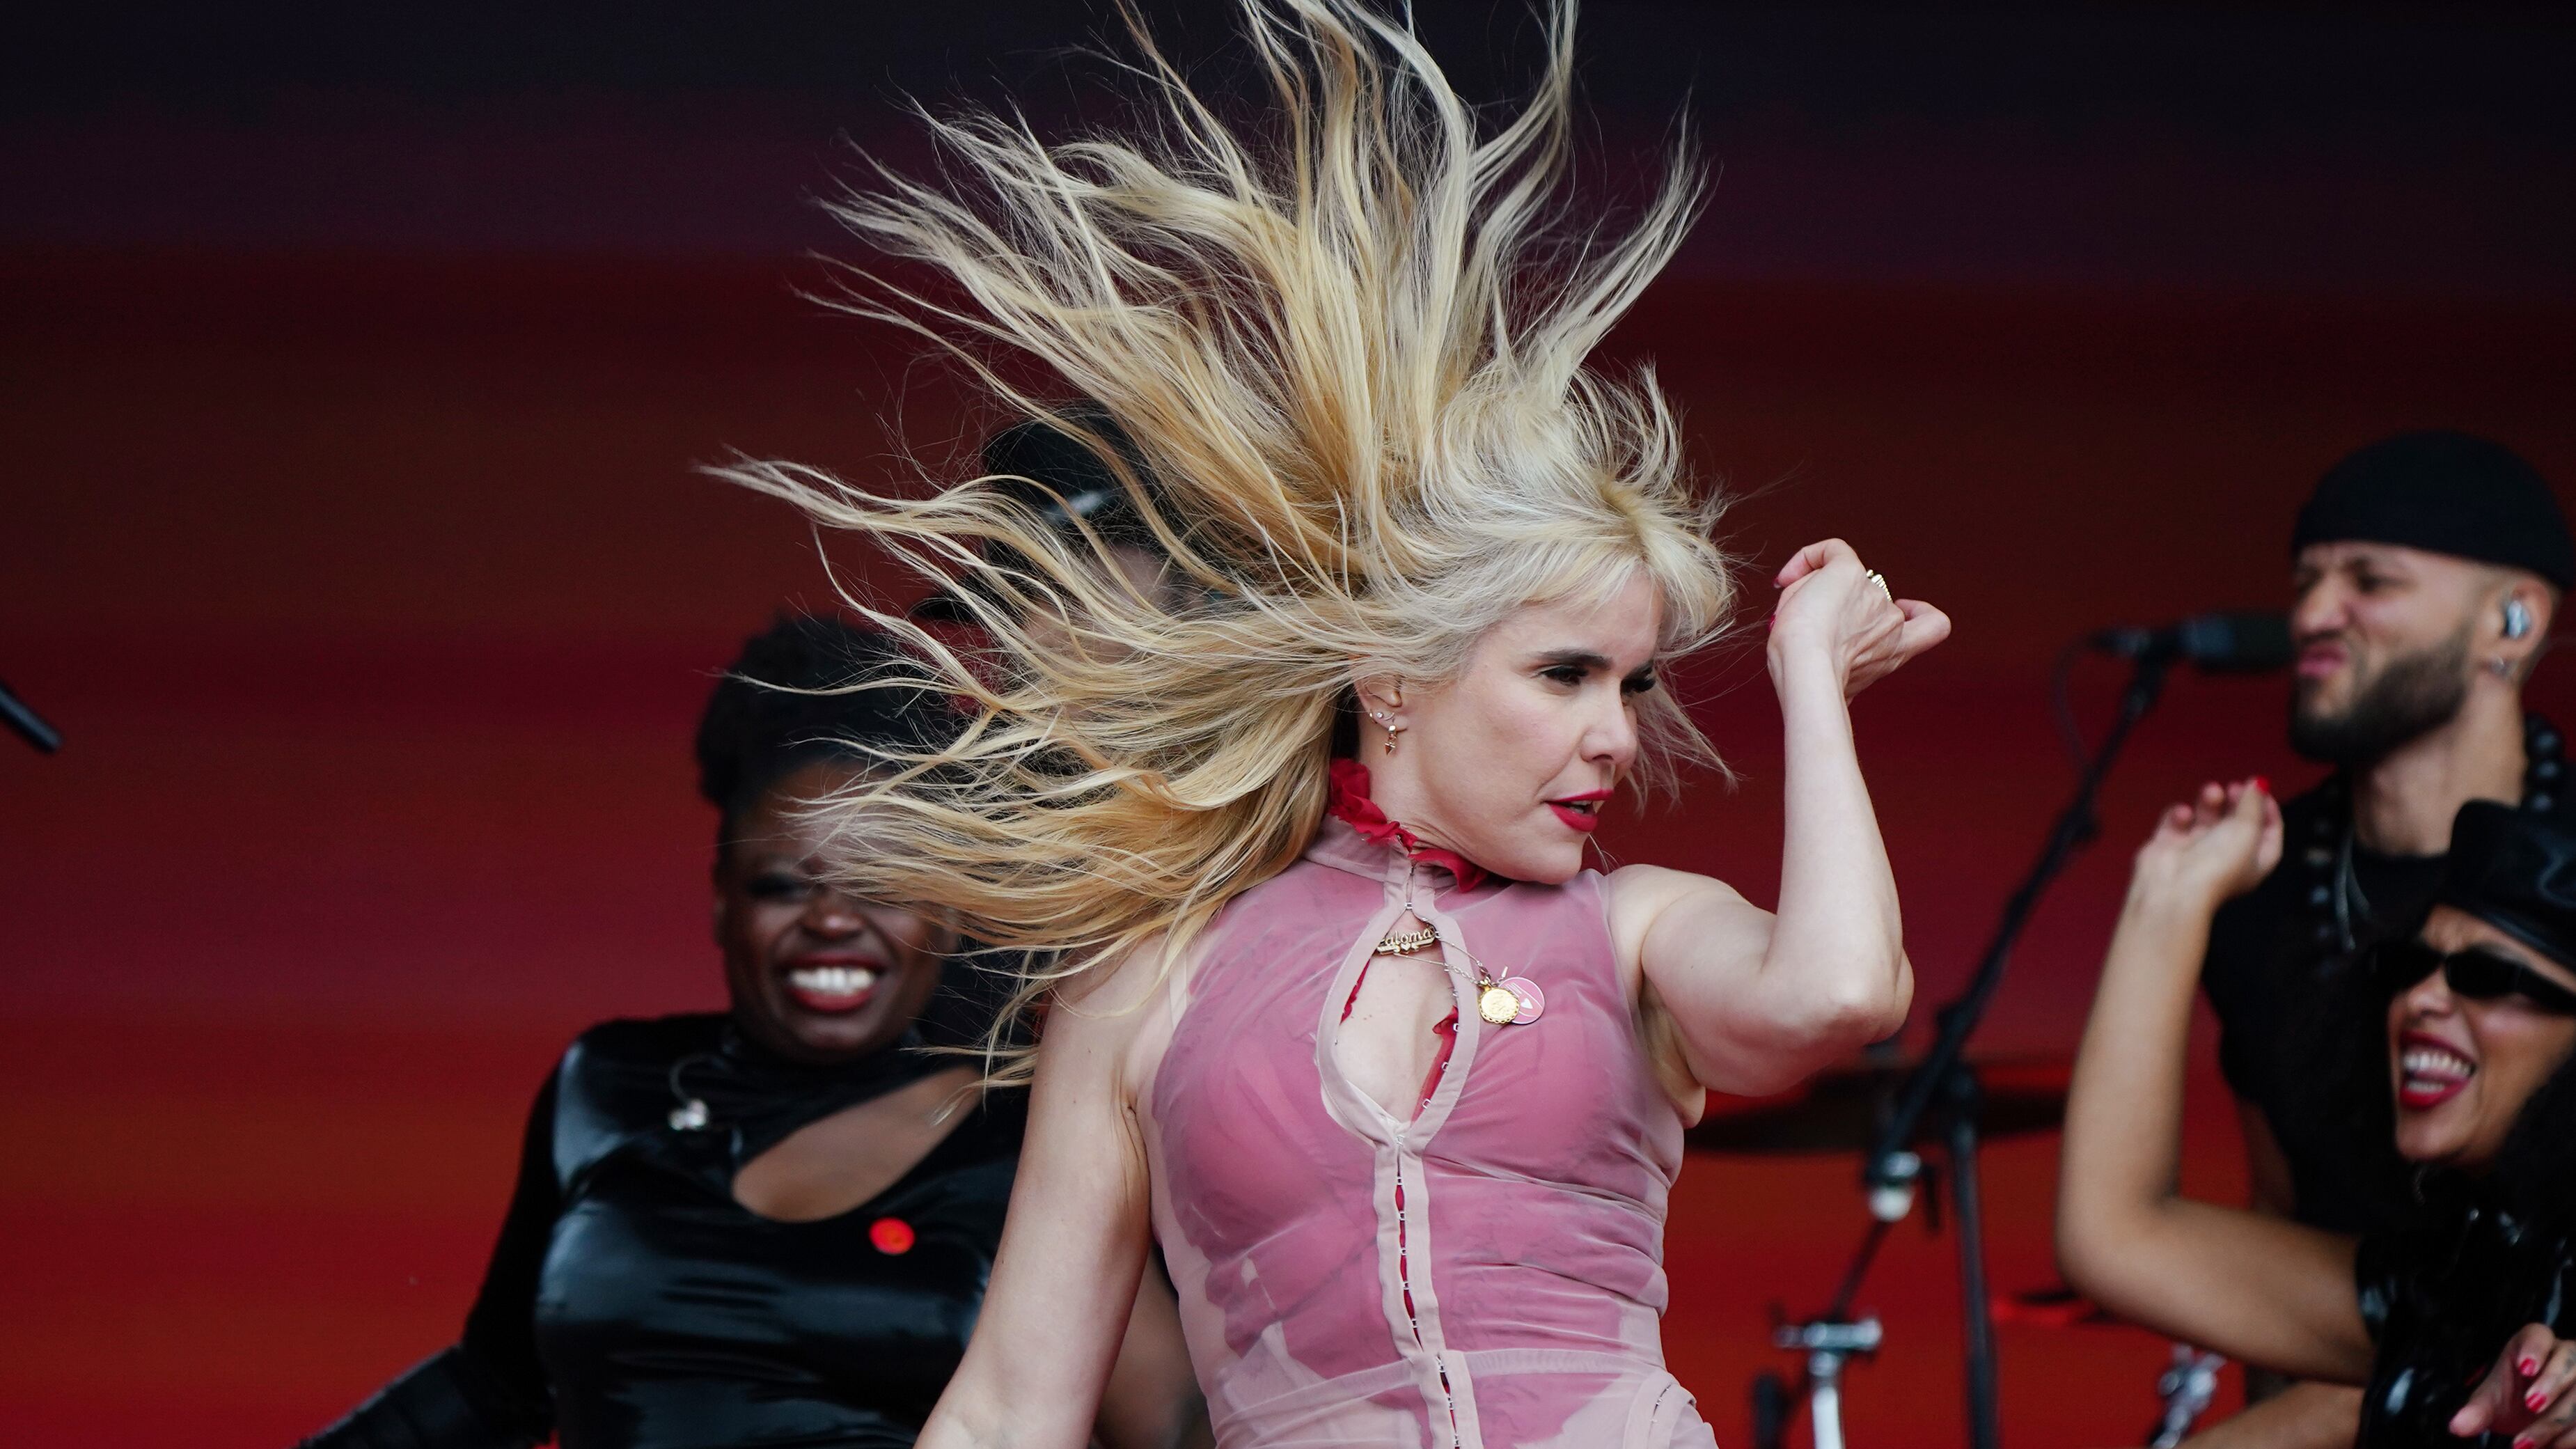 Paloma Faith had a message for the men in the audience